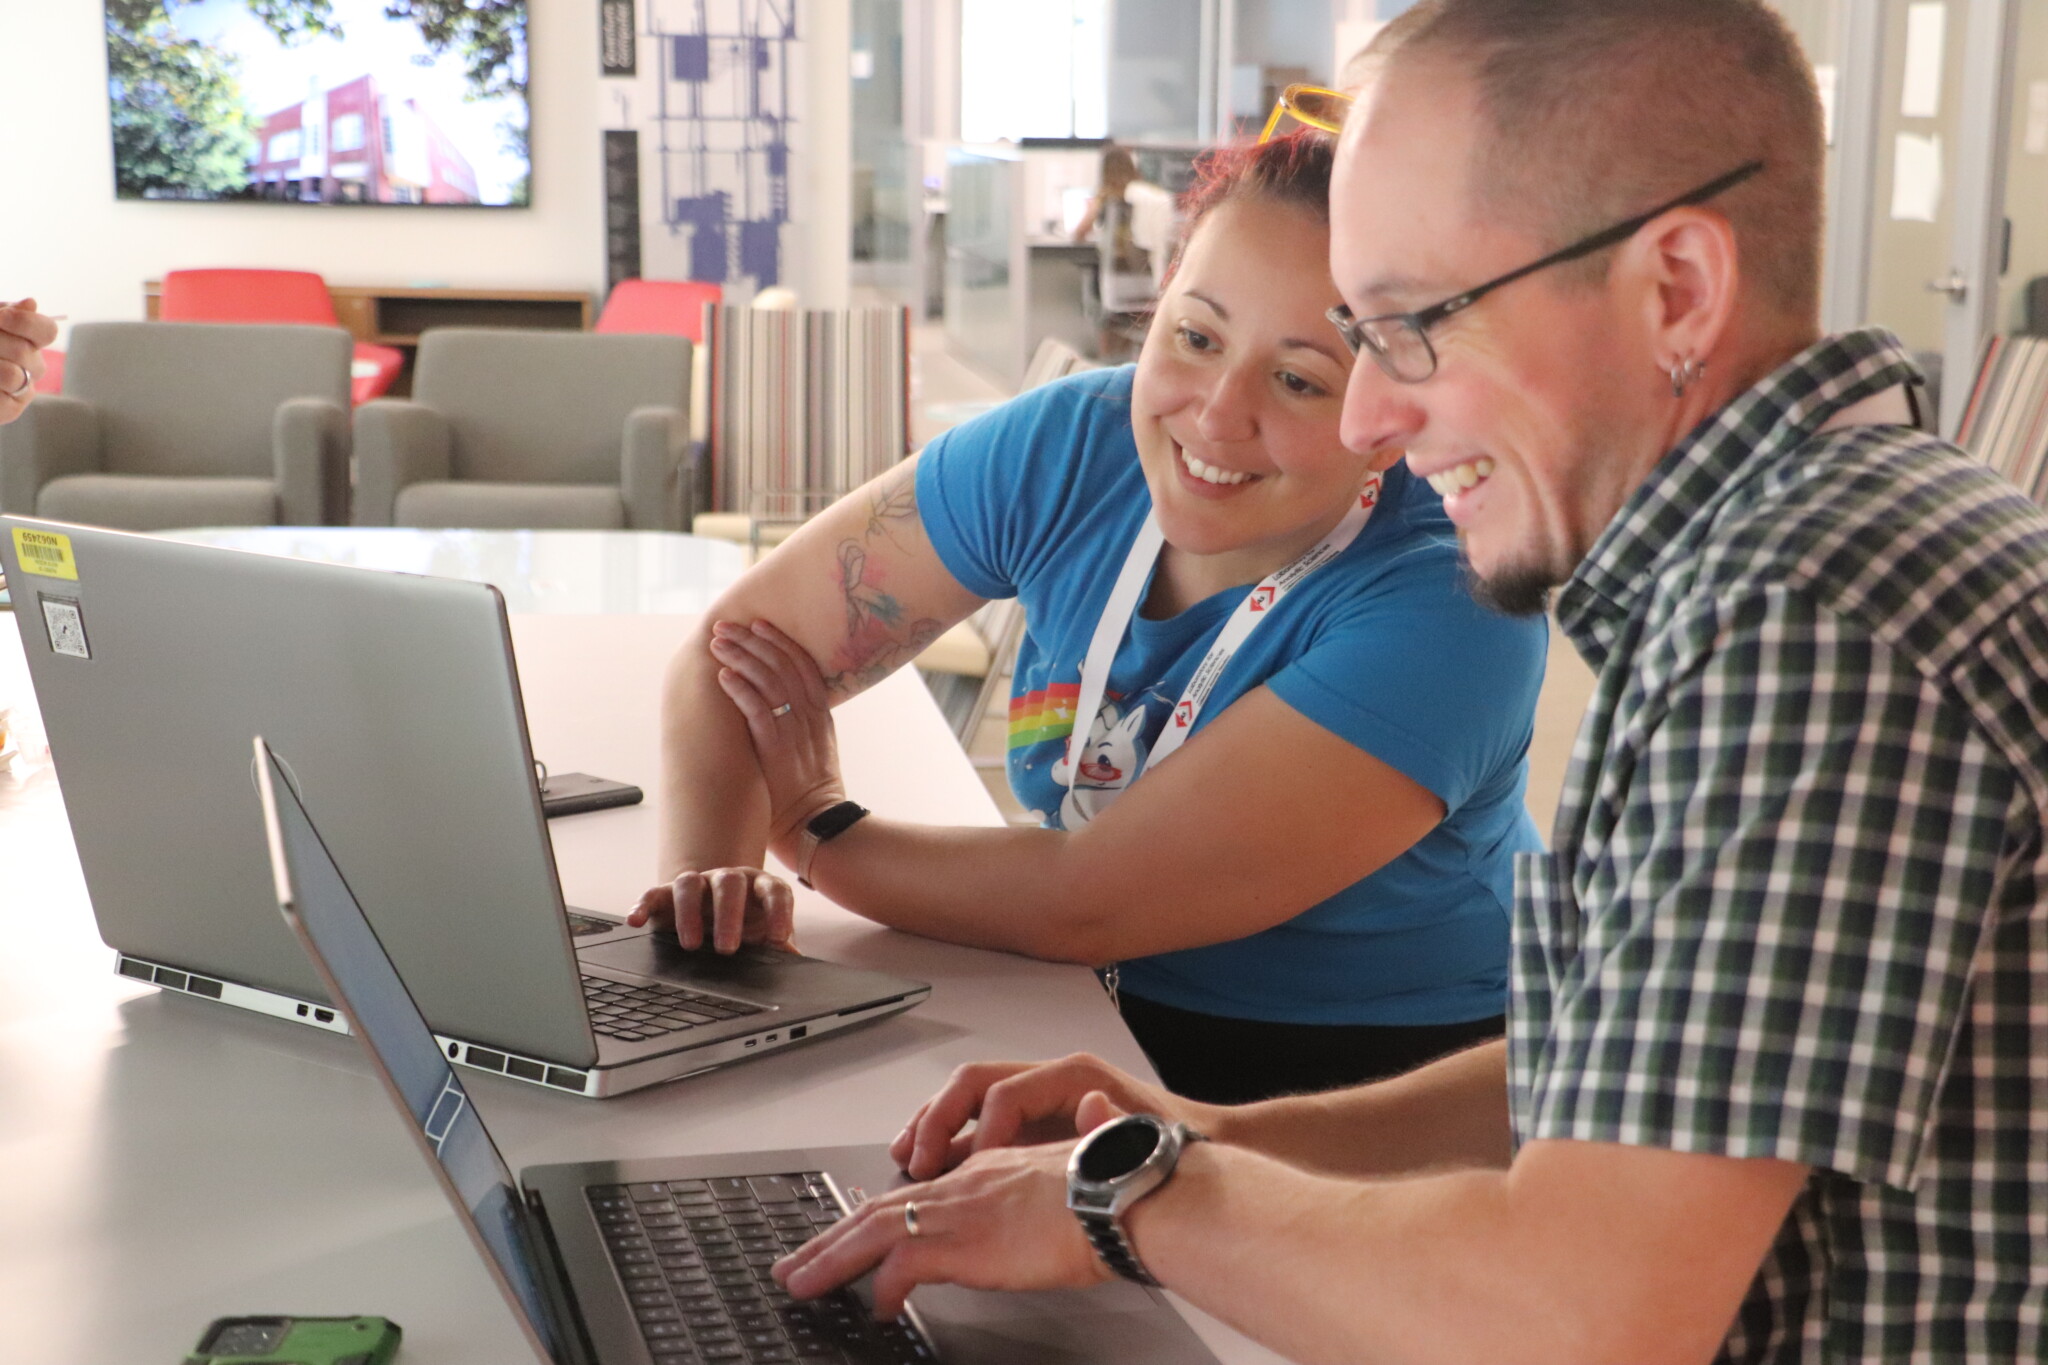 Two people smiling and working together at their laptops.